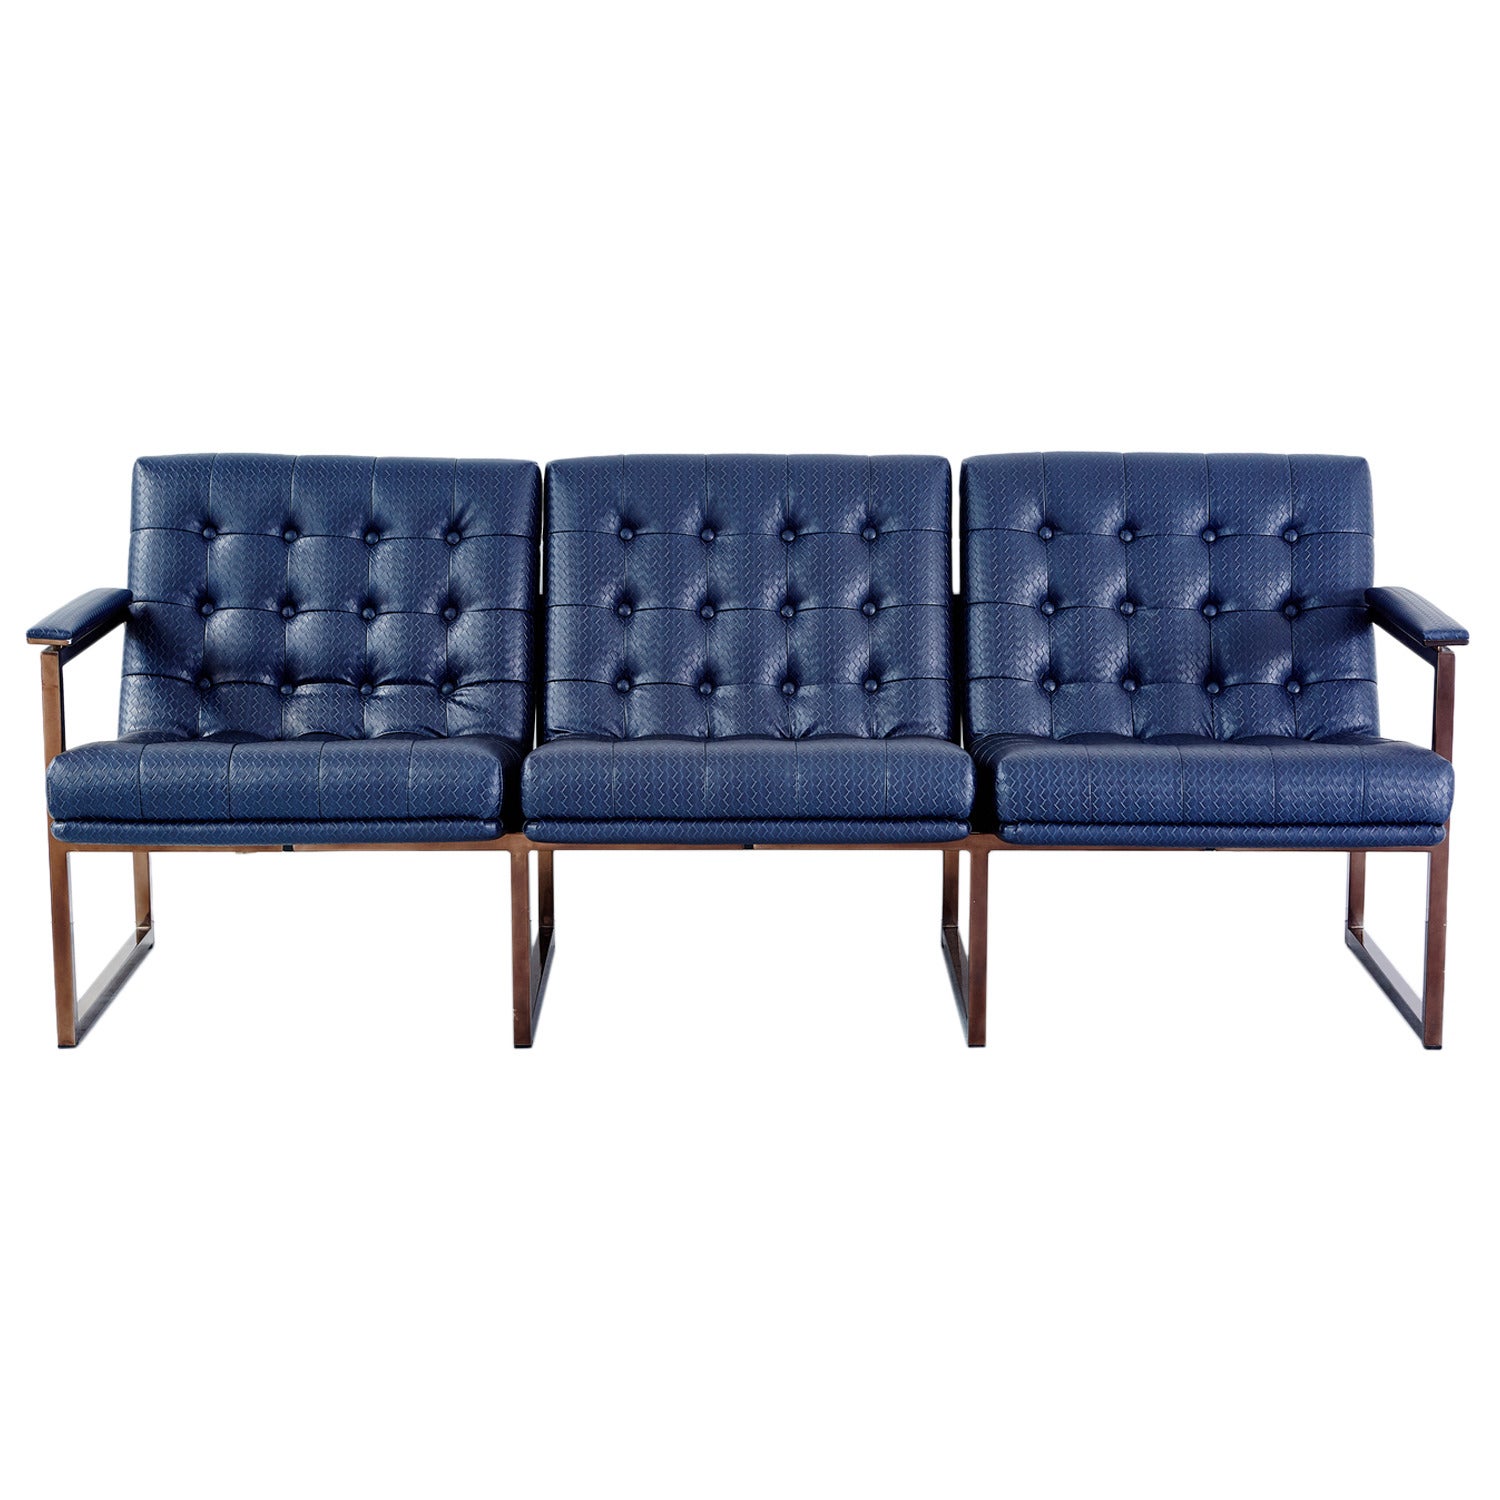 Milo Baughman Leather Sofa Newly Upholstered